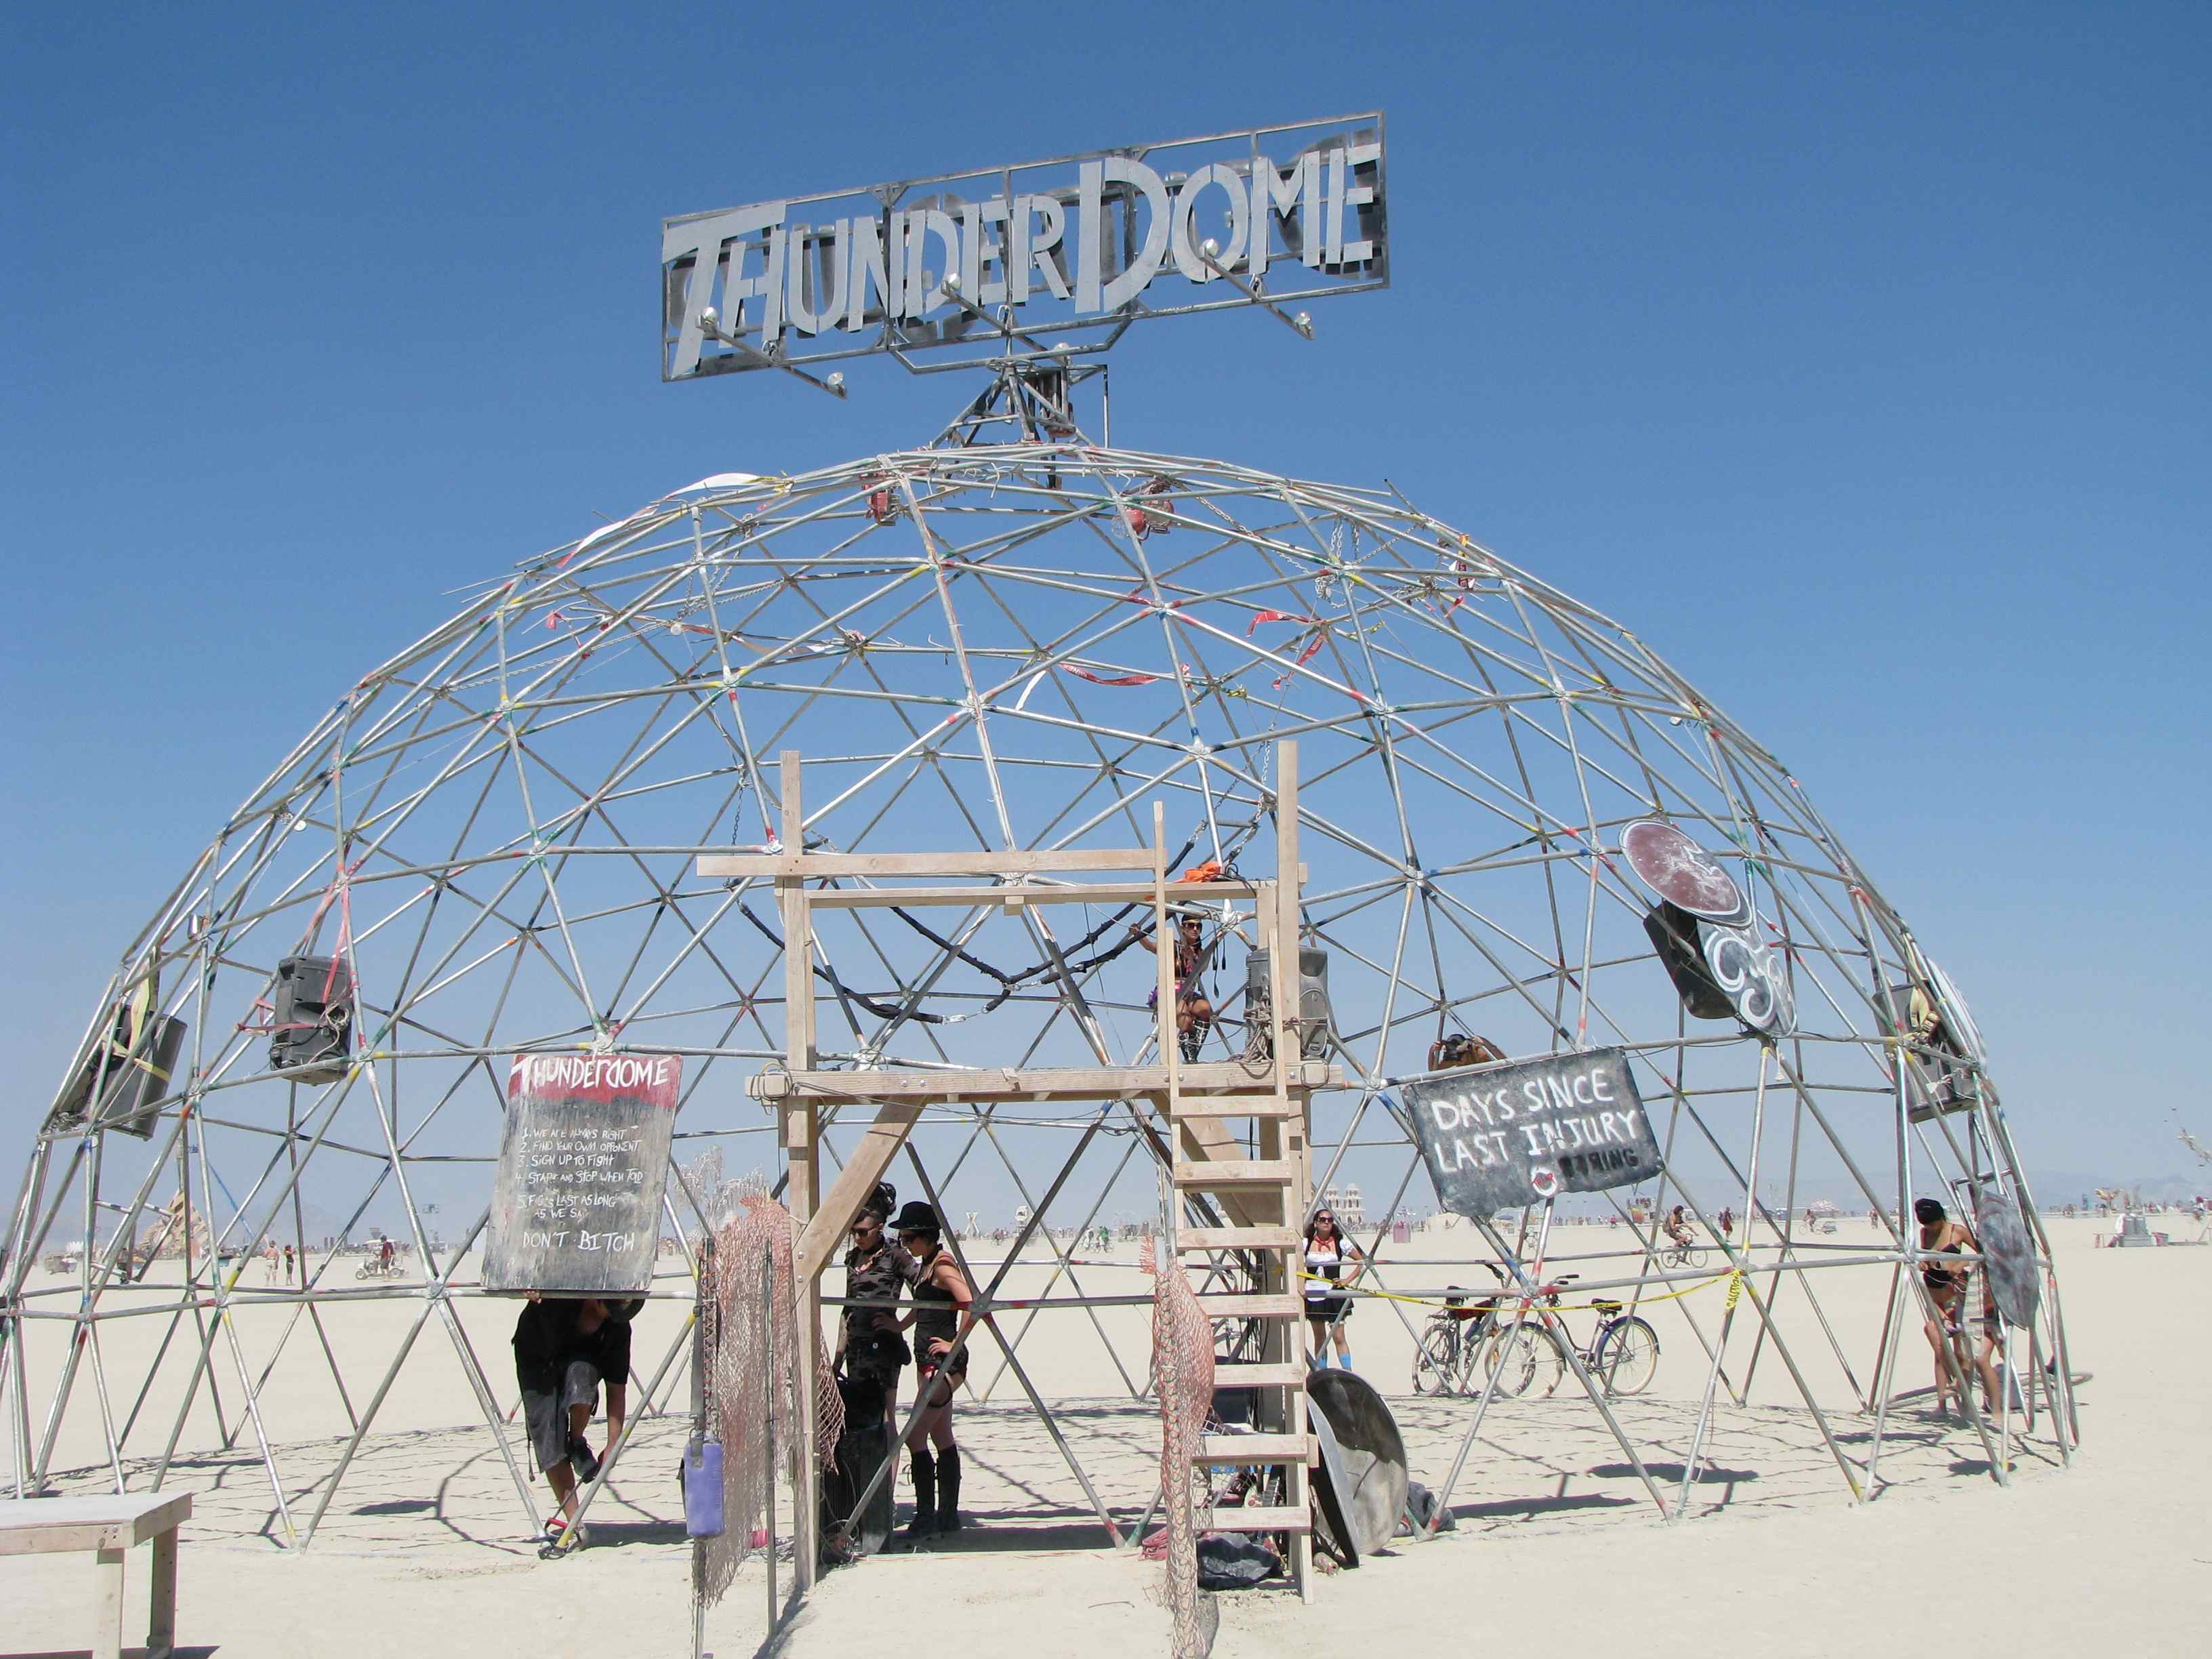 Thunderdome during the day-Burning Man 2011